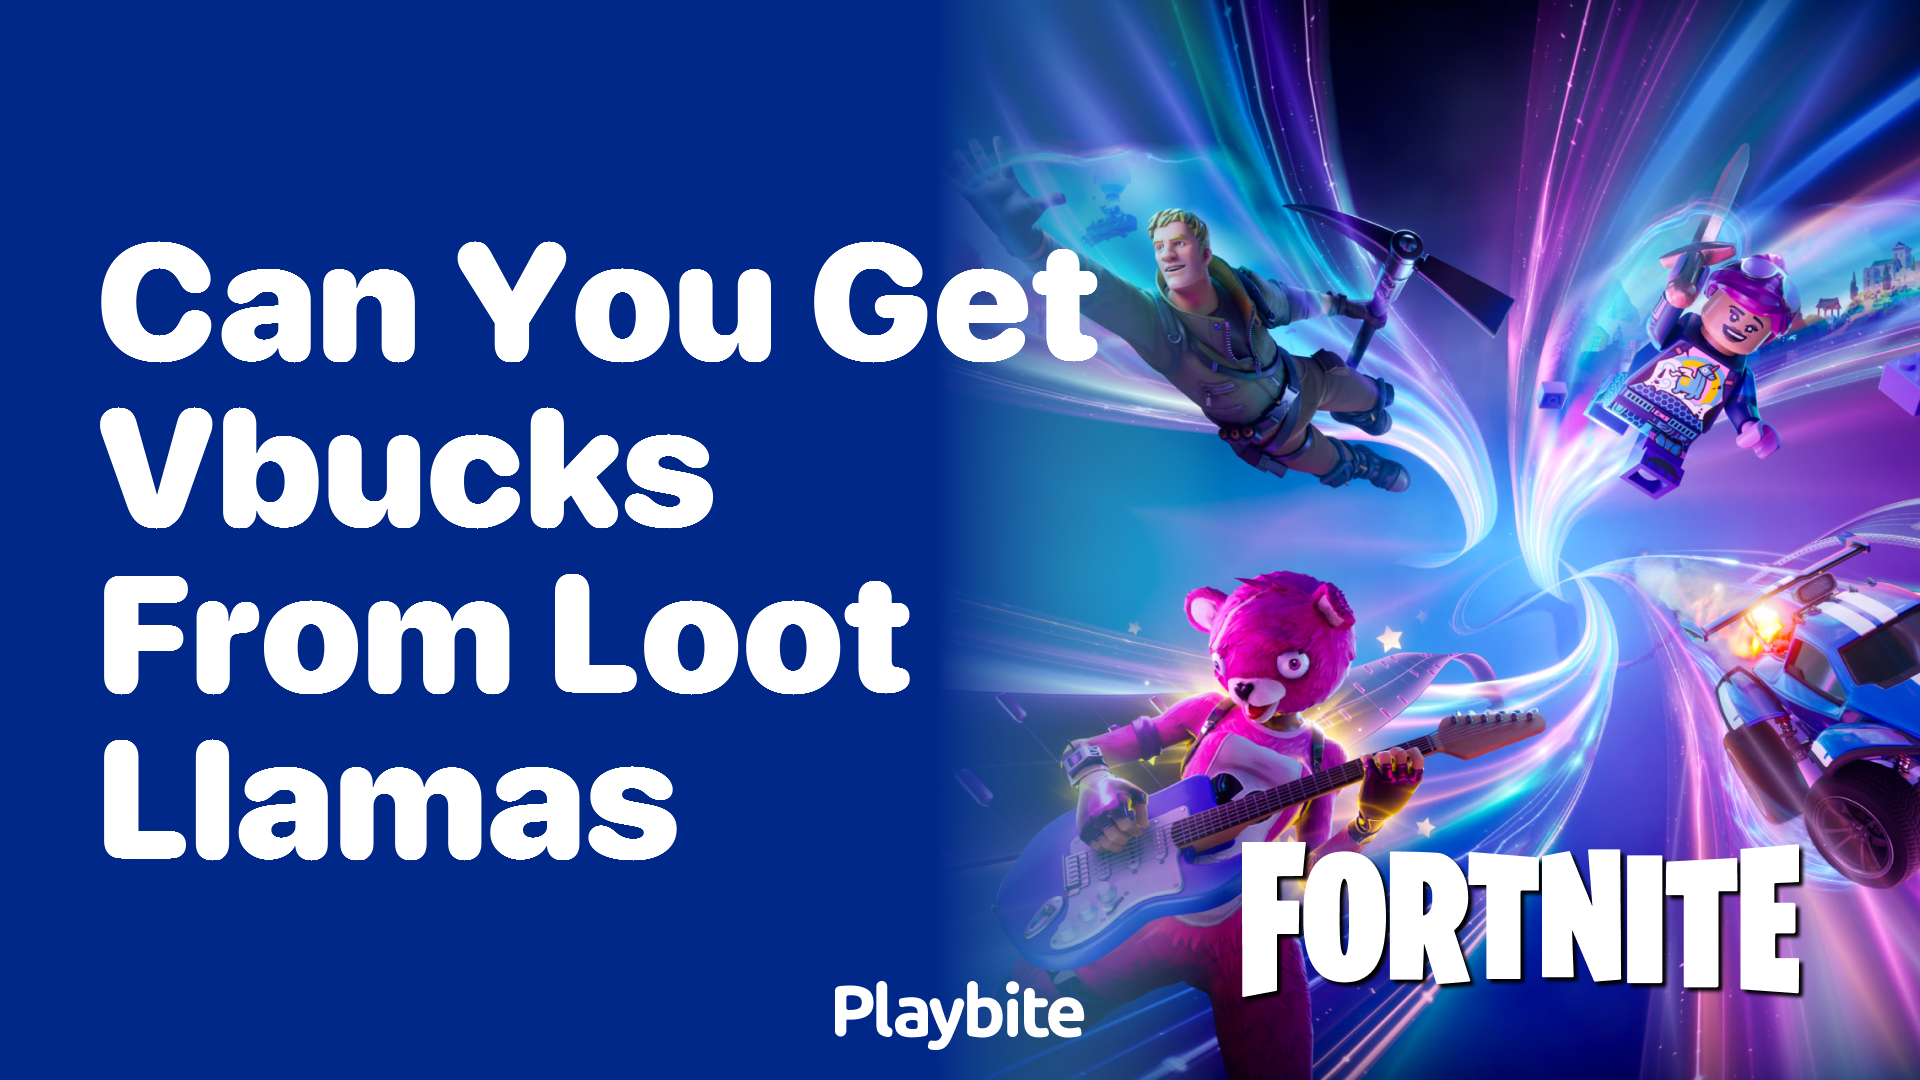 Can You Get V-Bucks from Loot Llamas in Fortnite?